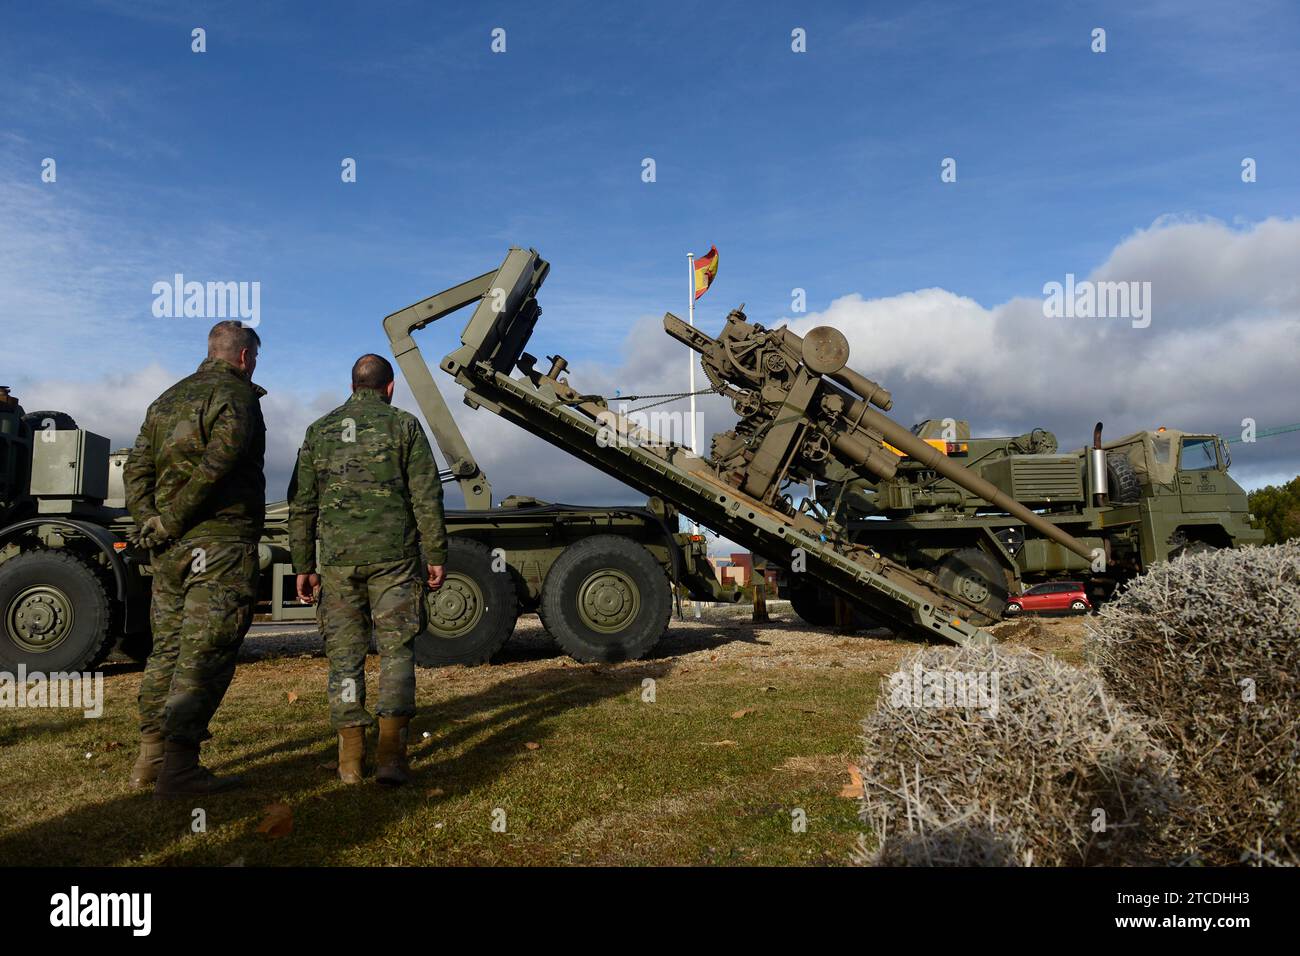 Madrid 12/27/2017. The Ministry of Defense has ordered the removal of an anti-aircraft cannon used in the Civil War, in the Plaza de la Artillería anti-aircraft in the Montecarmelo neighborhood. ARCHDC Photo by Maya Balanya. Credit: Album / Archivo ABC / Maya Balanya Stock Photo